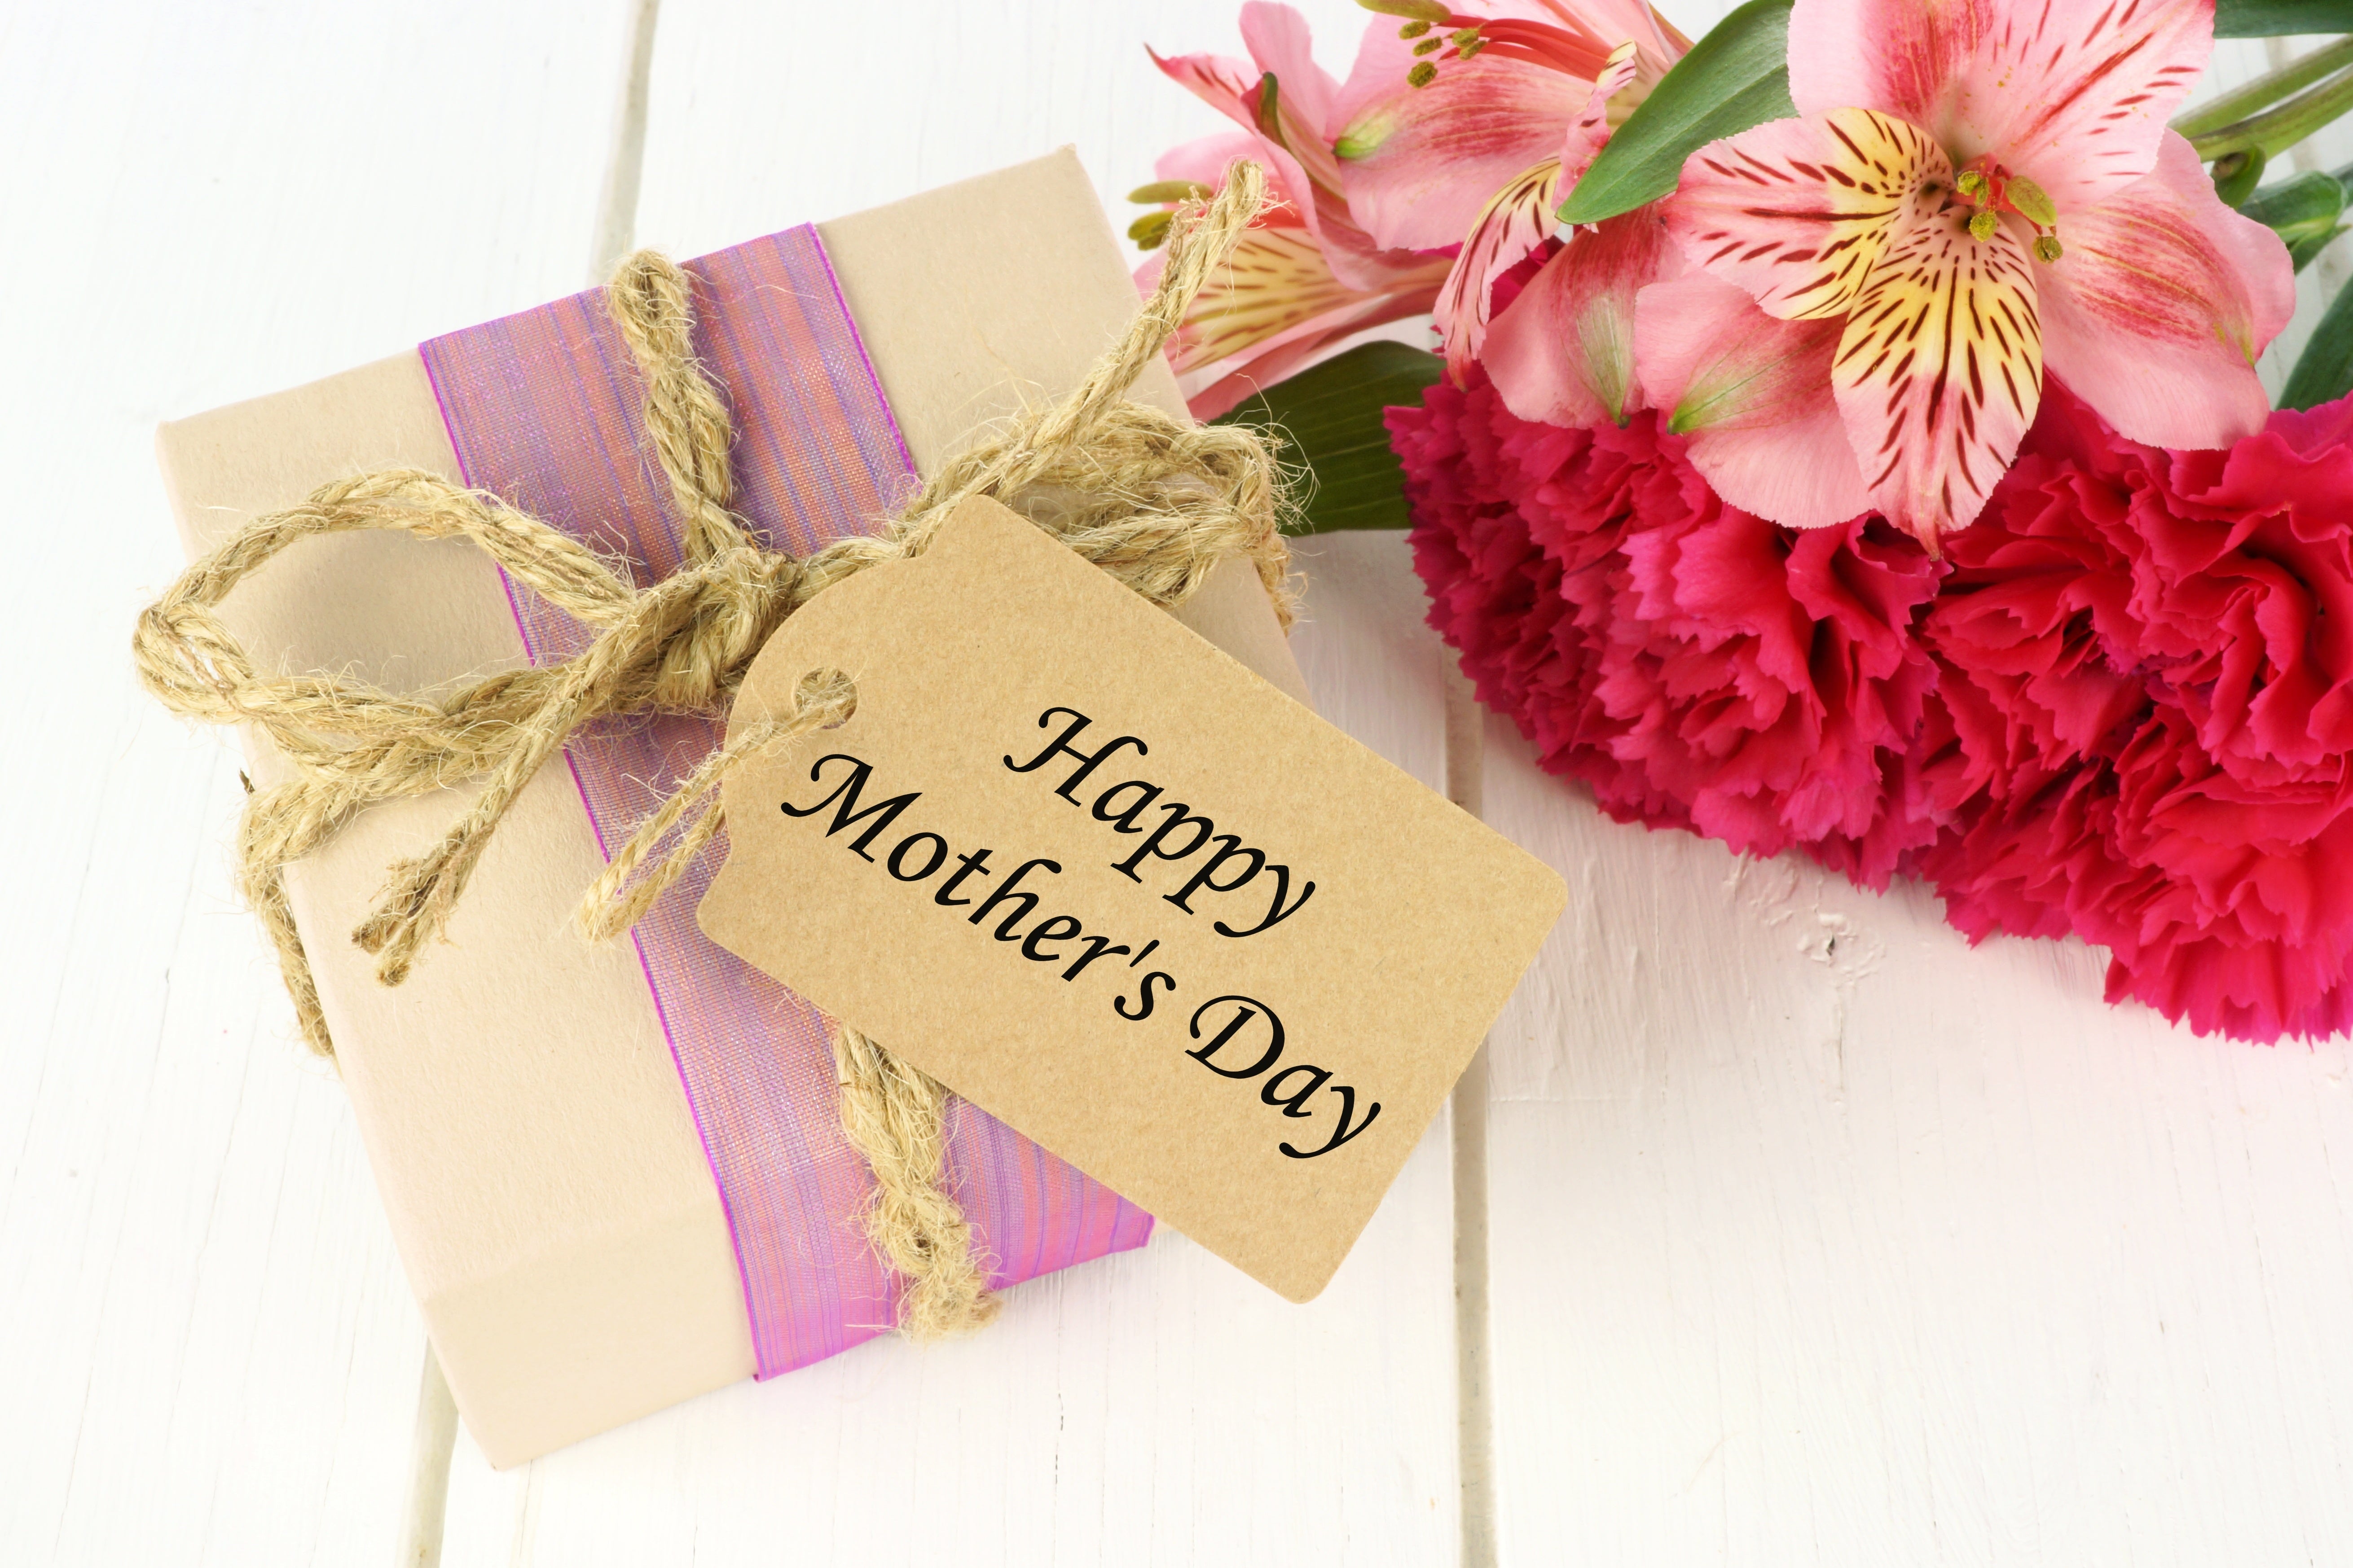 6 Reasons why to get your Mother a Massage Gift for Mother’s Day